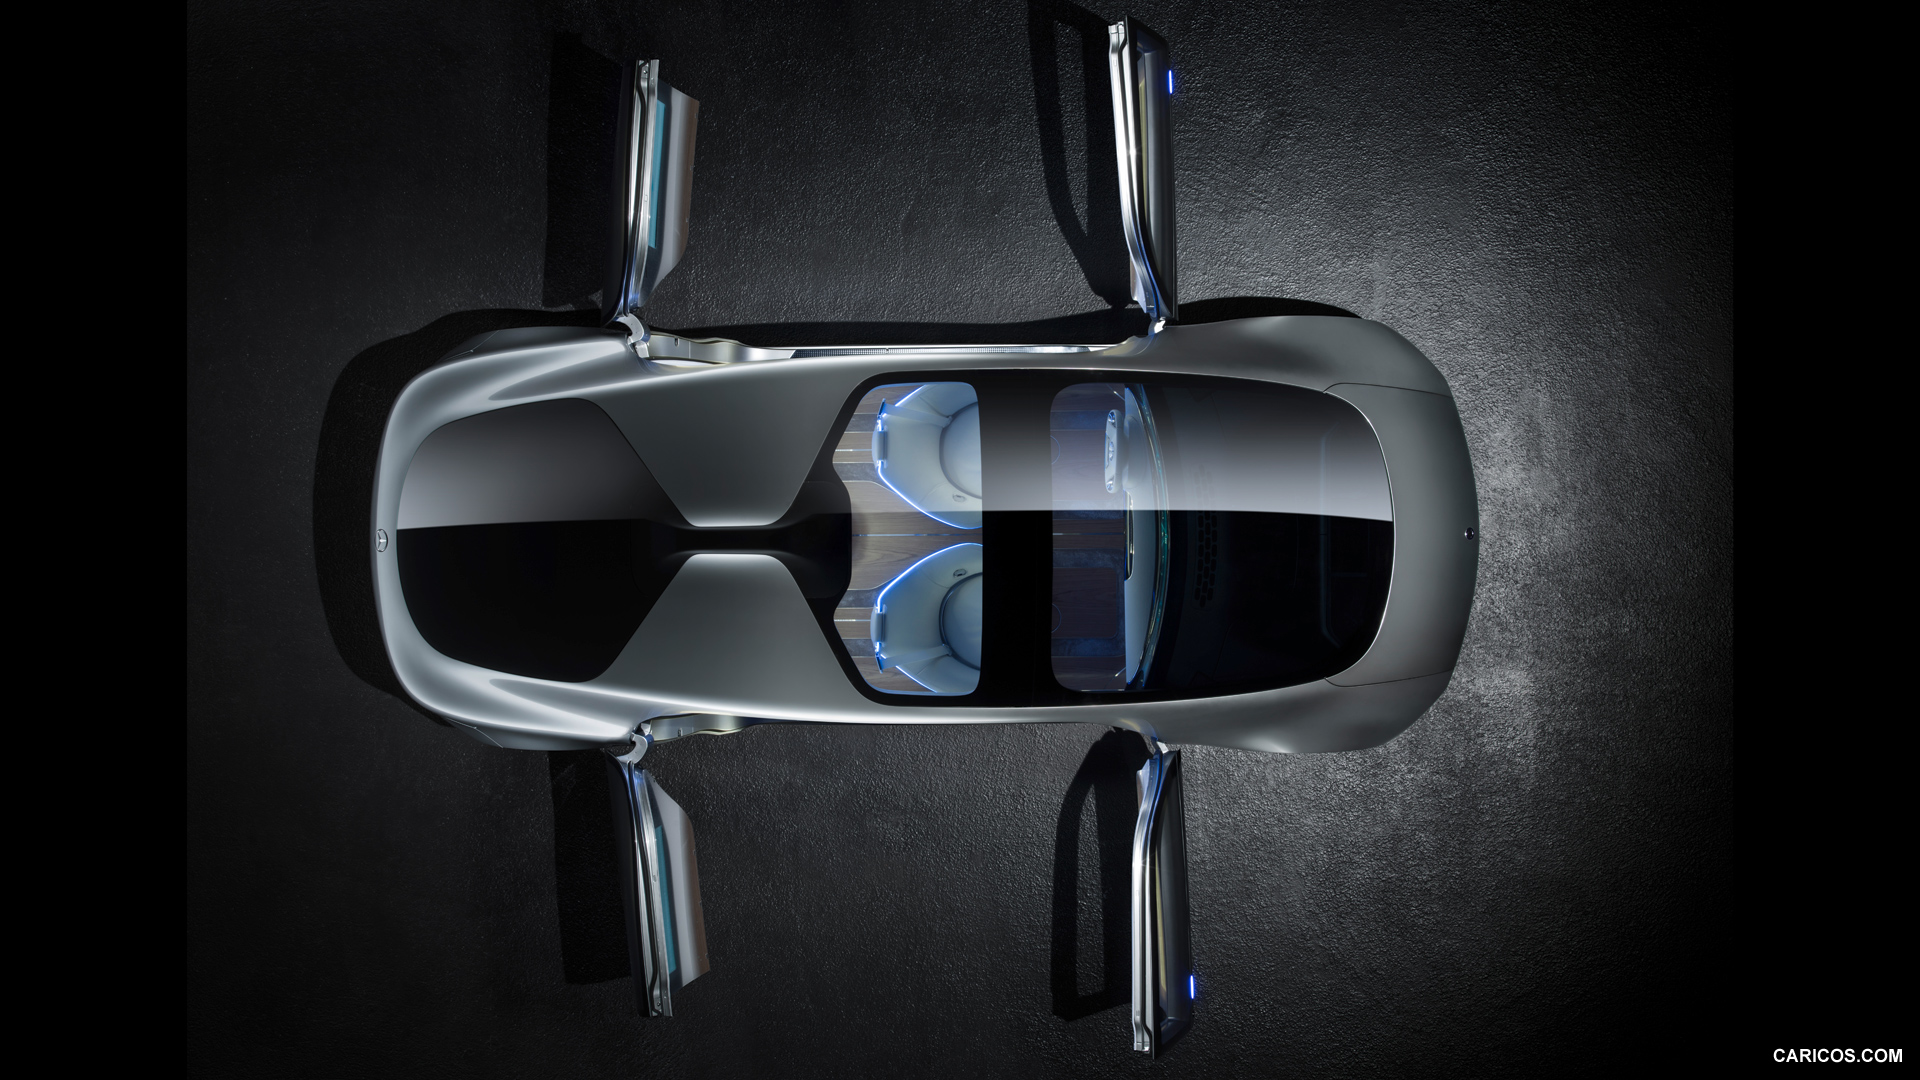 2015 Mercedes-Benz F 015 Luxury in Motion Concept  - Top, #57 of 92